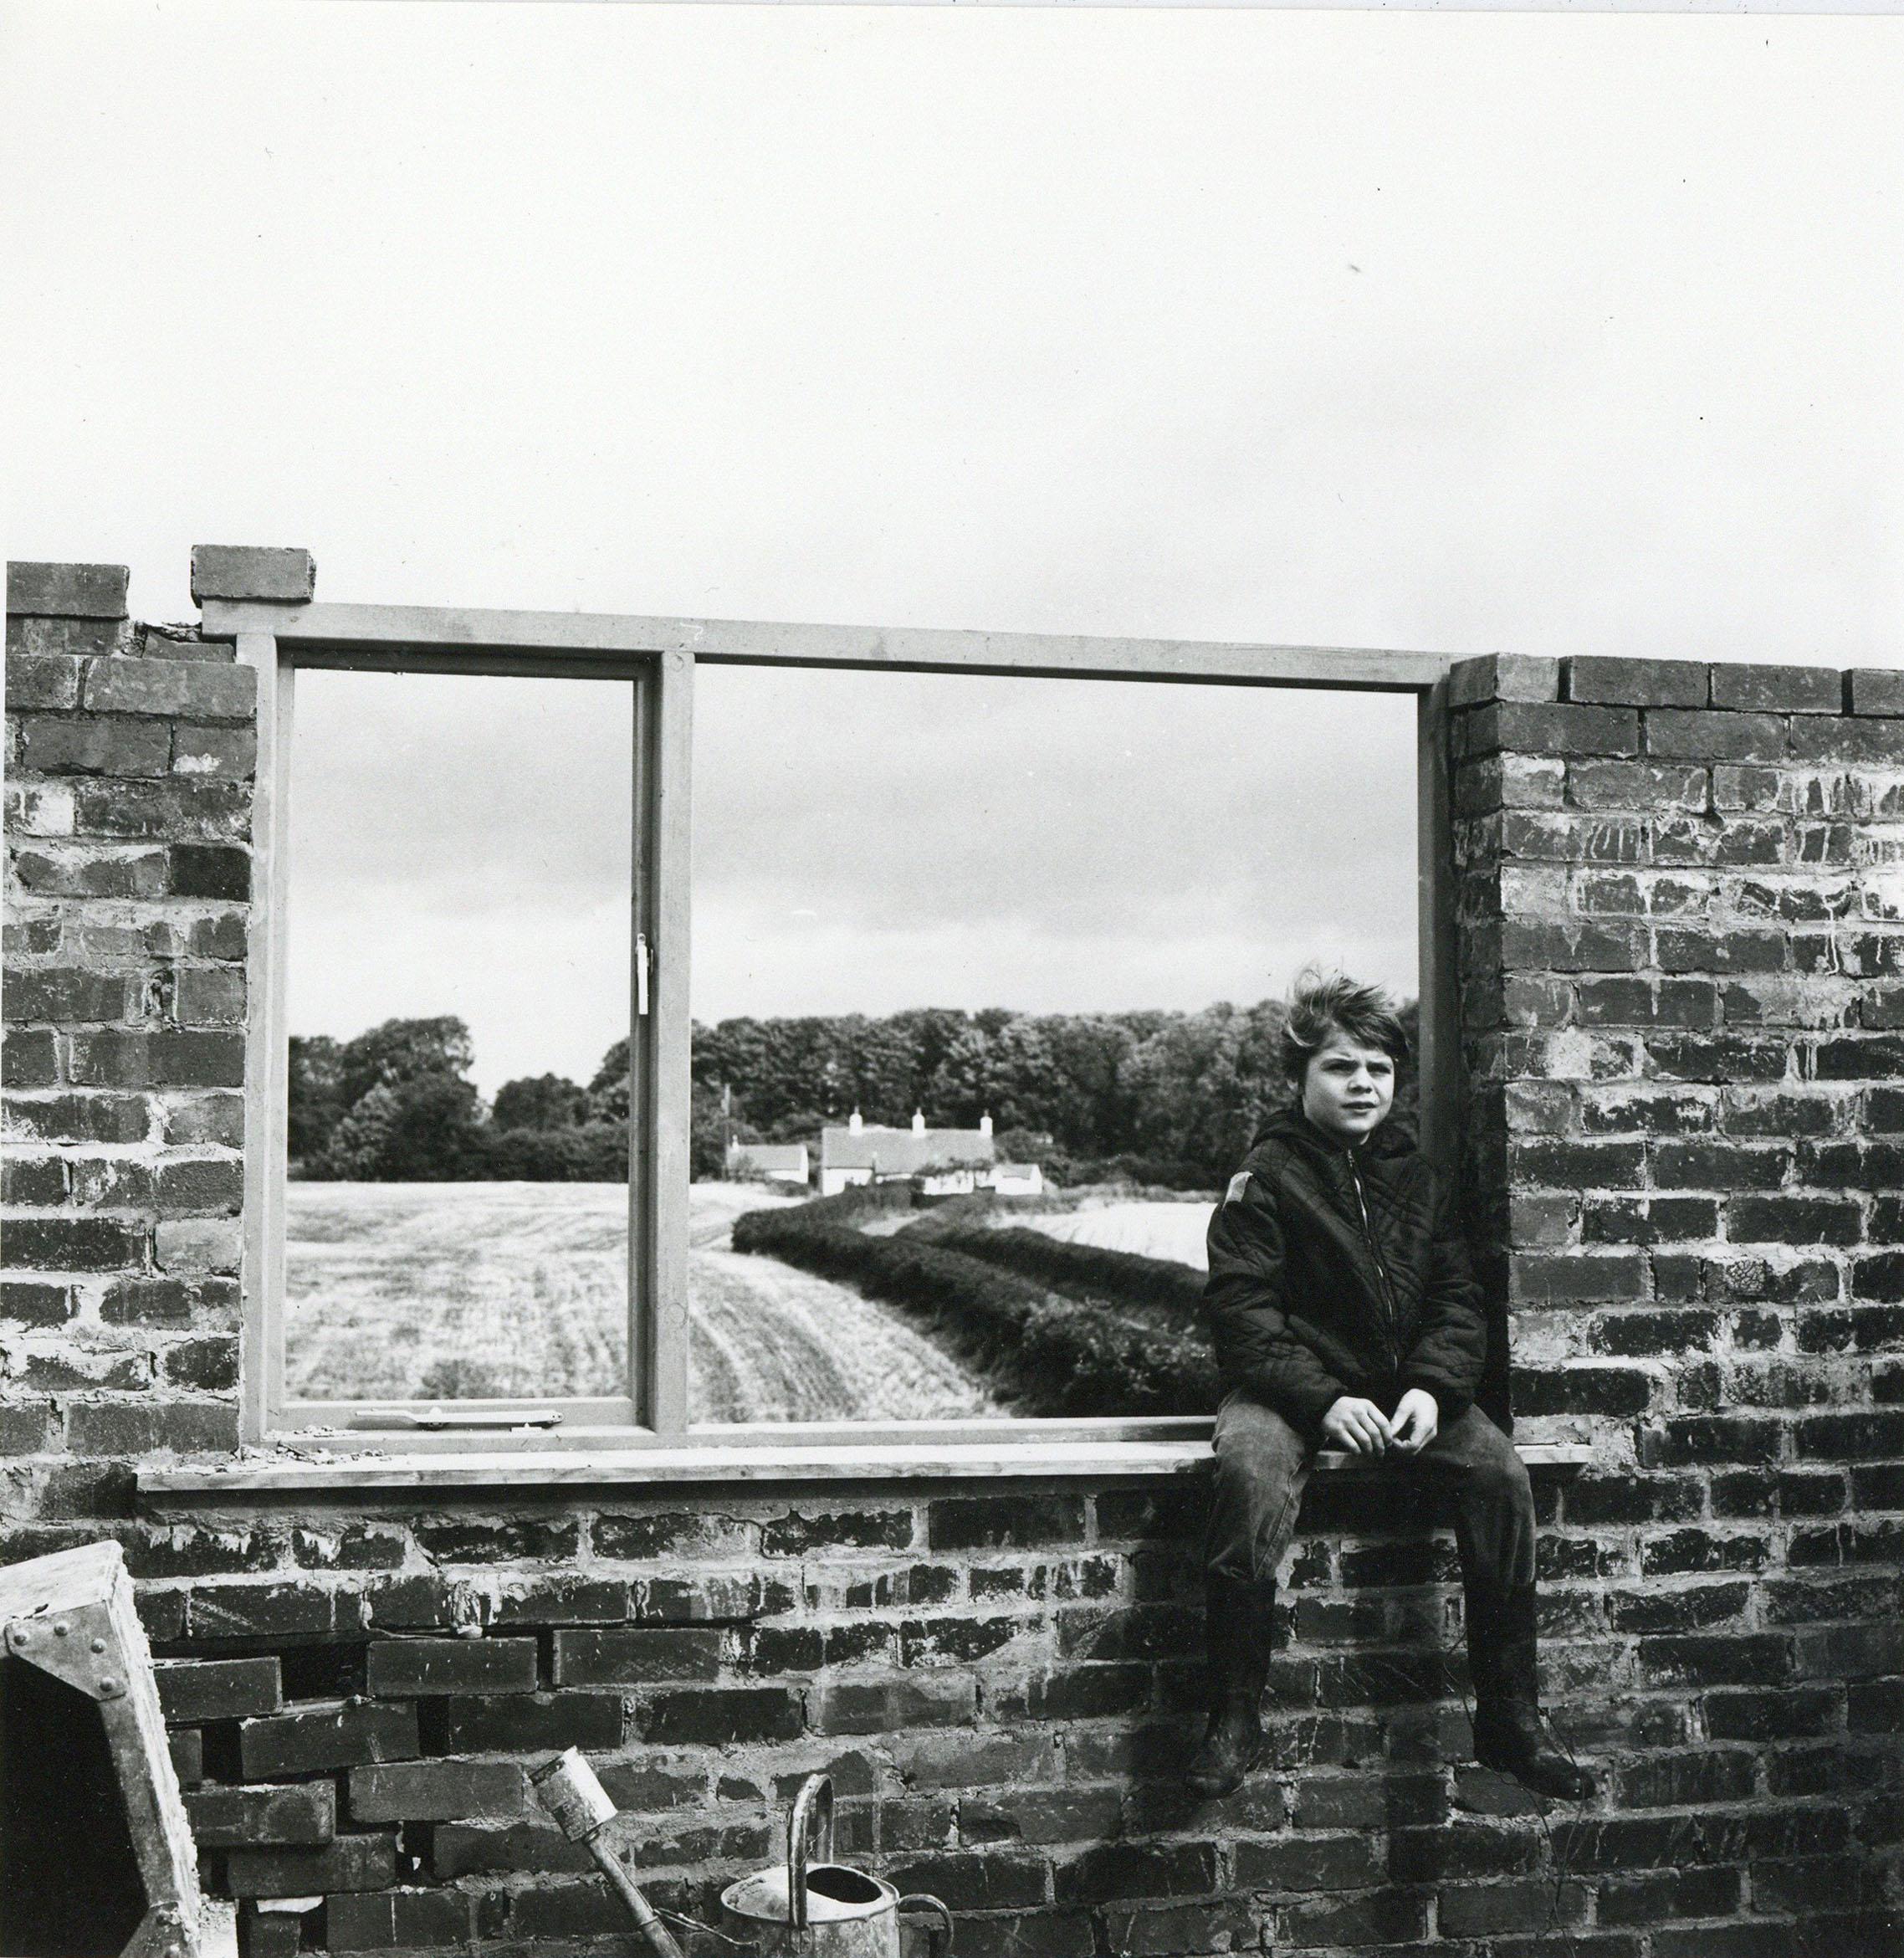 Rosemary Ellis (1910-1988)
Windows
Original photography for Windows in the Outlooks and Insights series published by Bodley Head, by Rosemary & Charlotte Ellis.
Silver Gelatin Photograph Print
13 x 13cm

Rosemary Ellis was well known as a talented